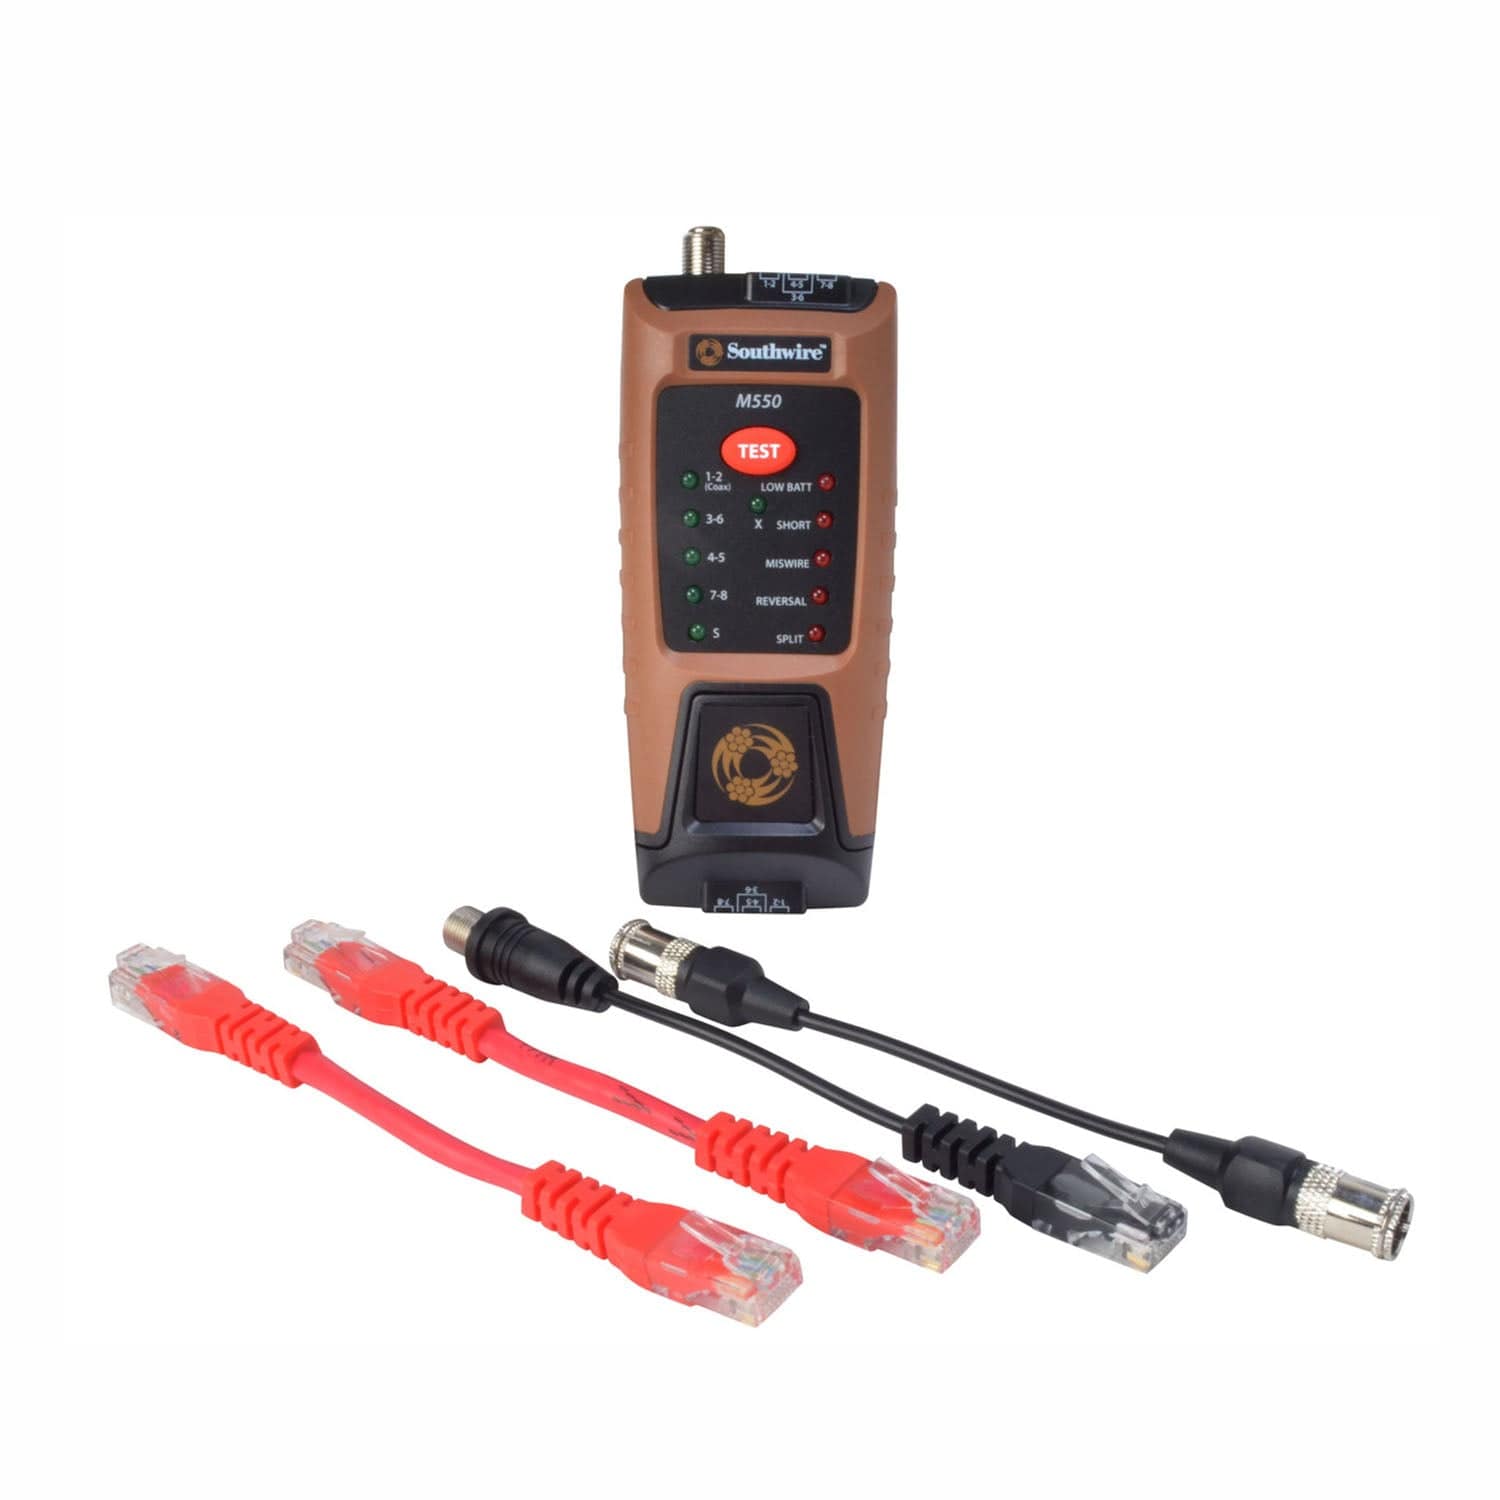 Southwire M550 Continuity Tester for Data & Coax Cables